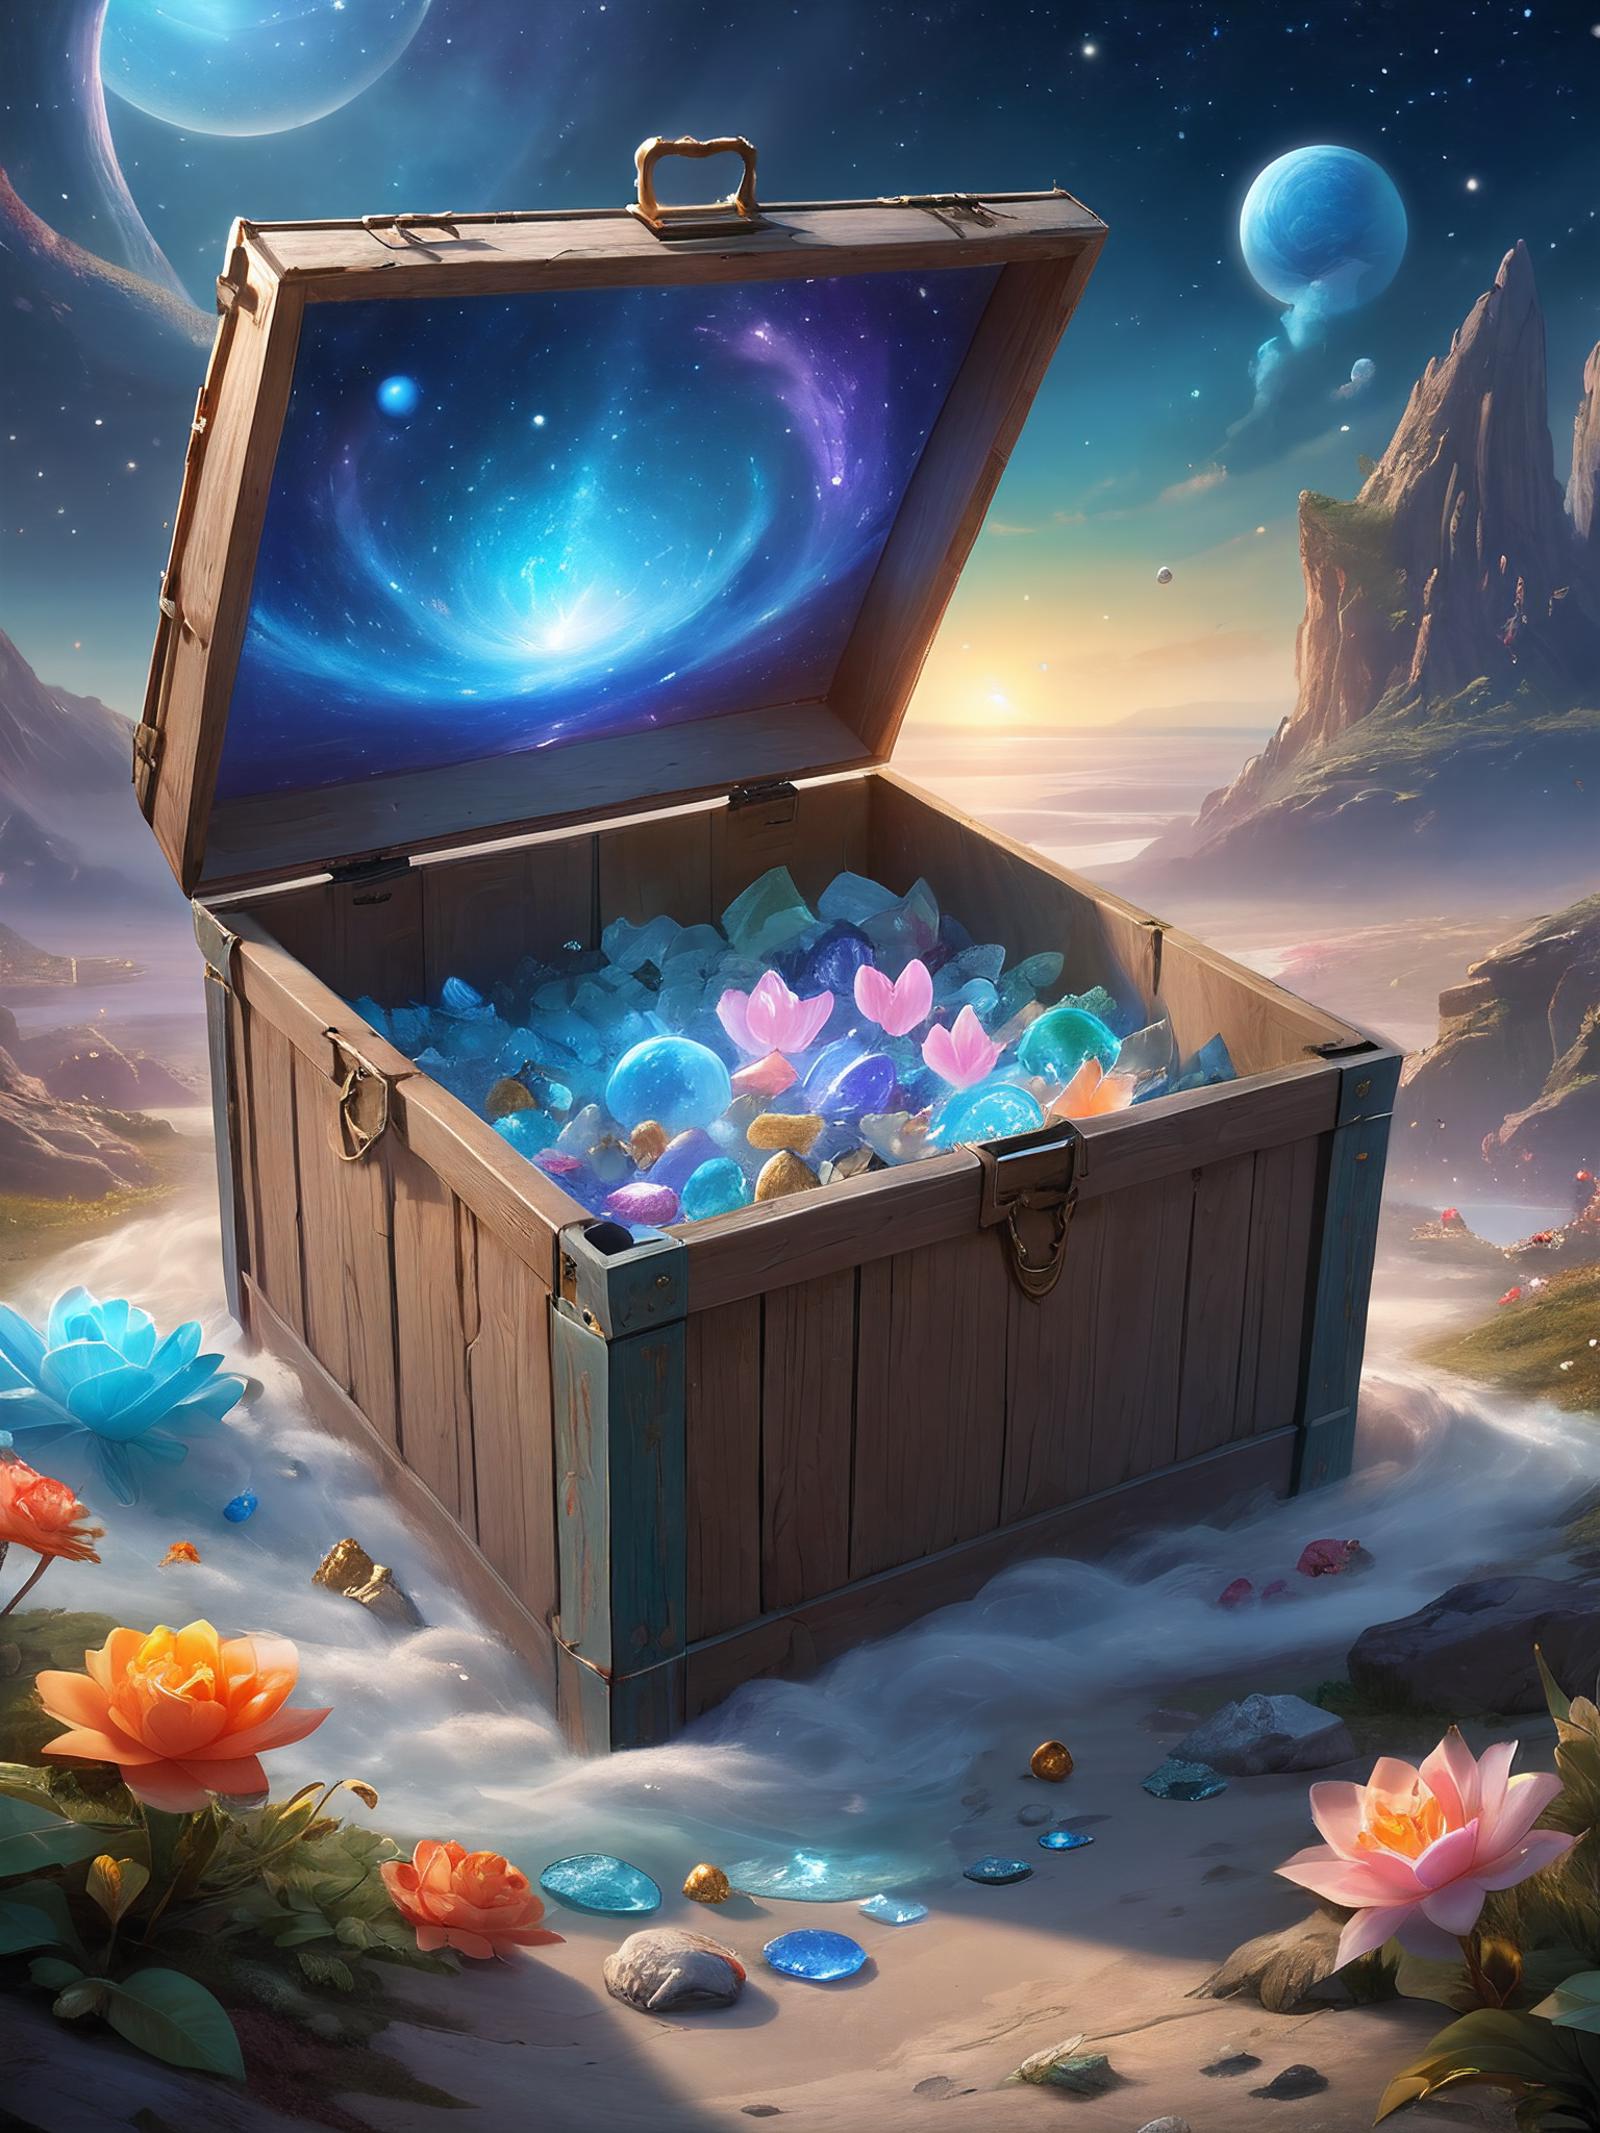 A box filled with colorful jewels, including gems and flowers, on a field of flowers.